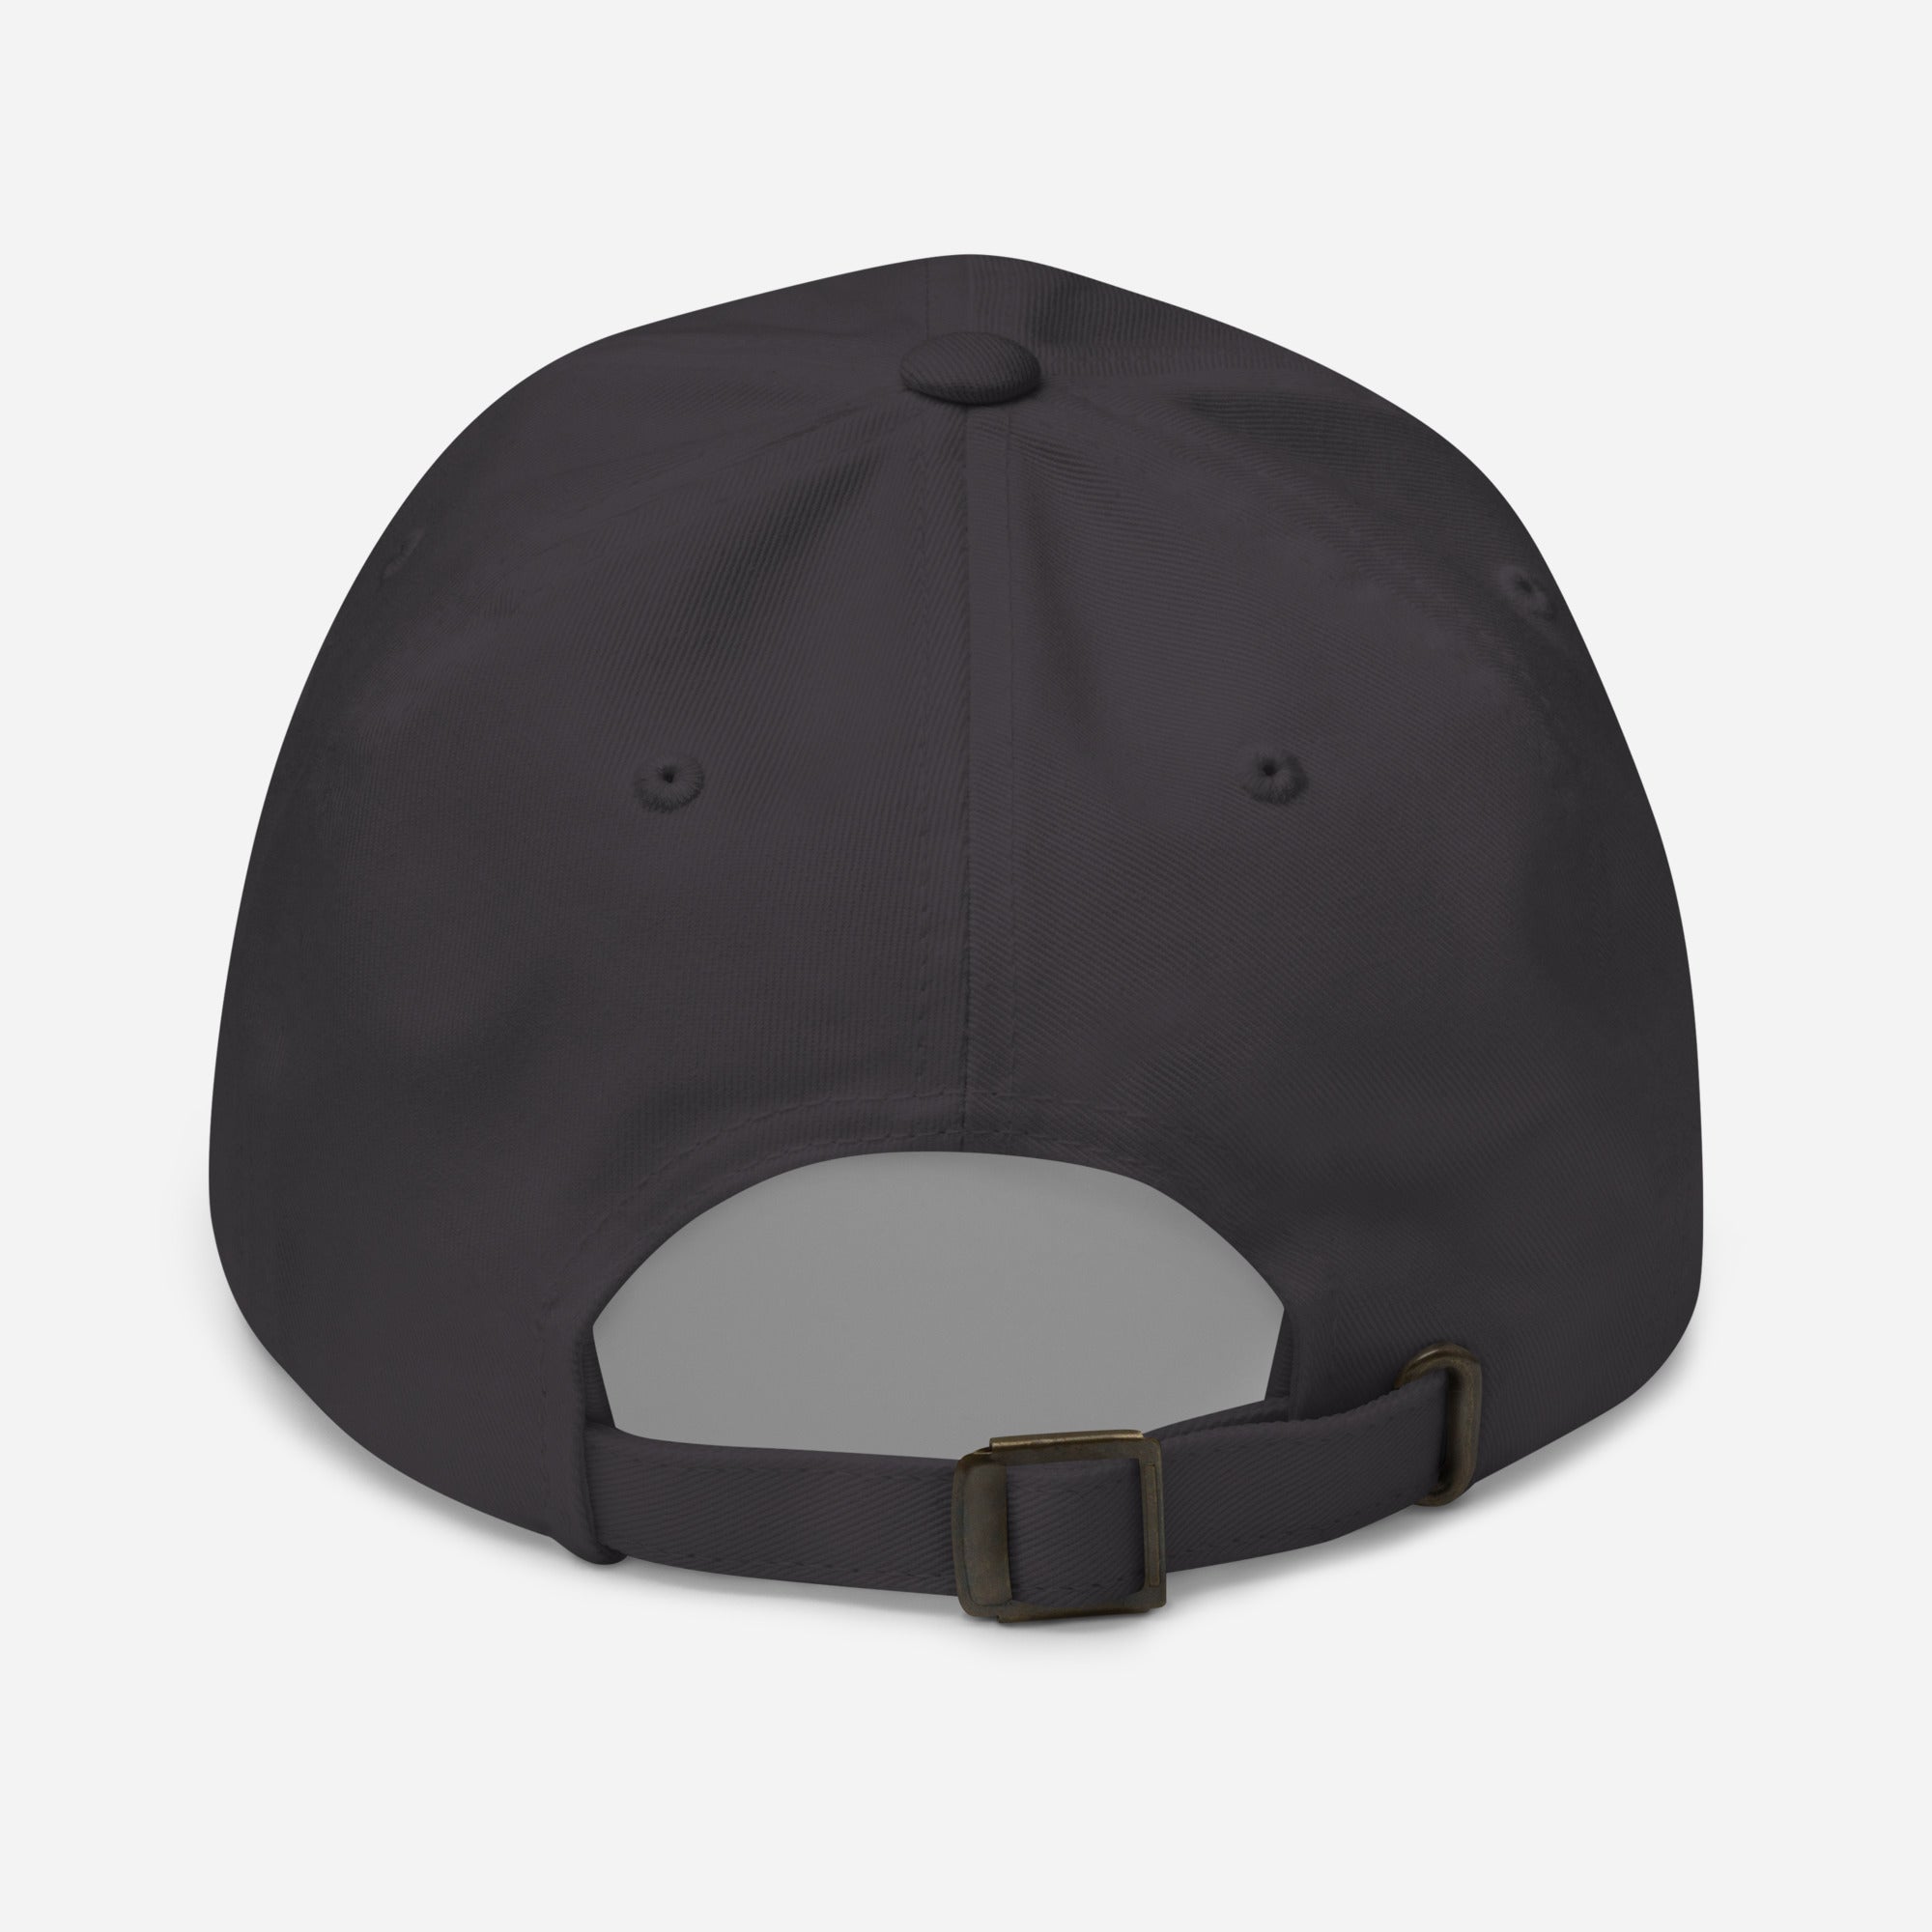 Grand Cities Dad hat